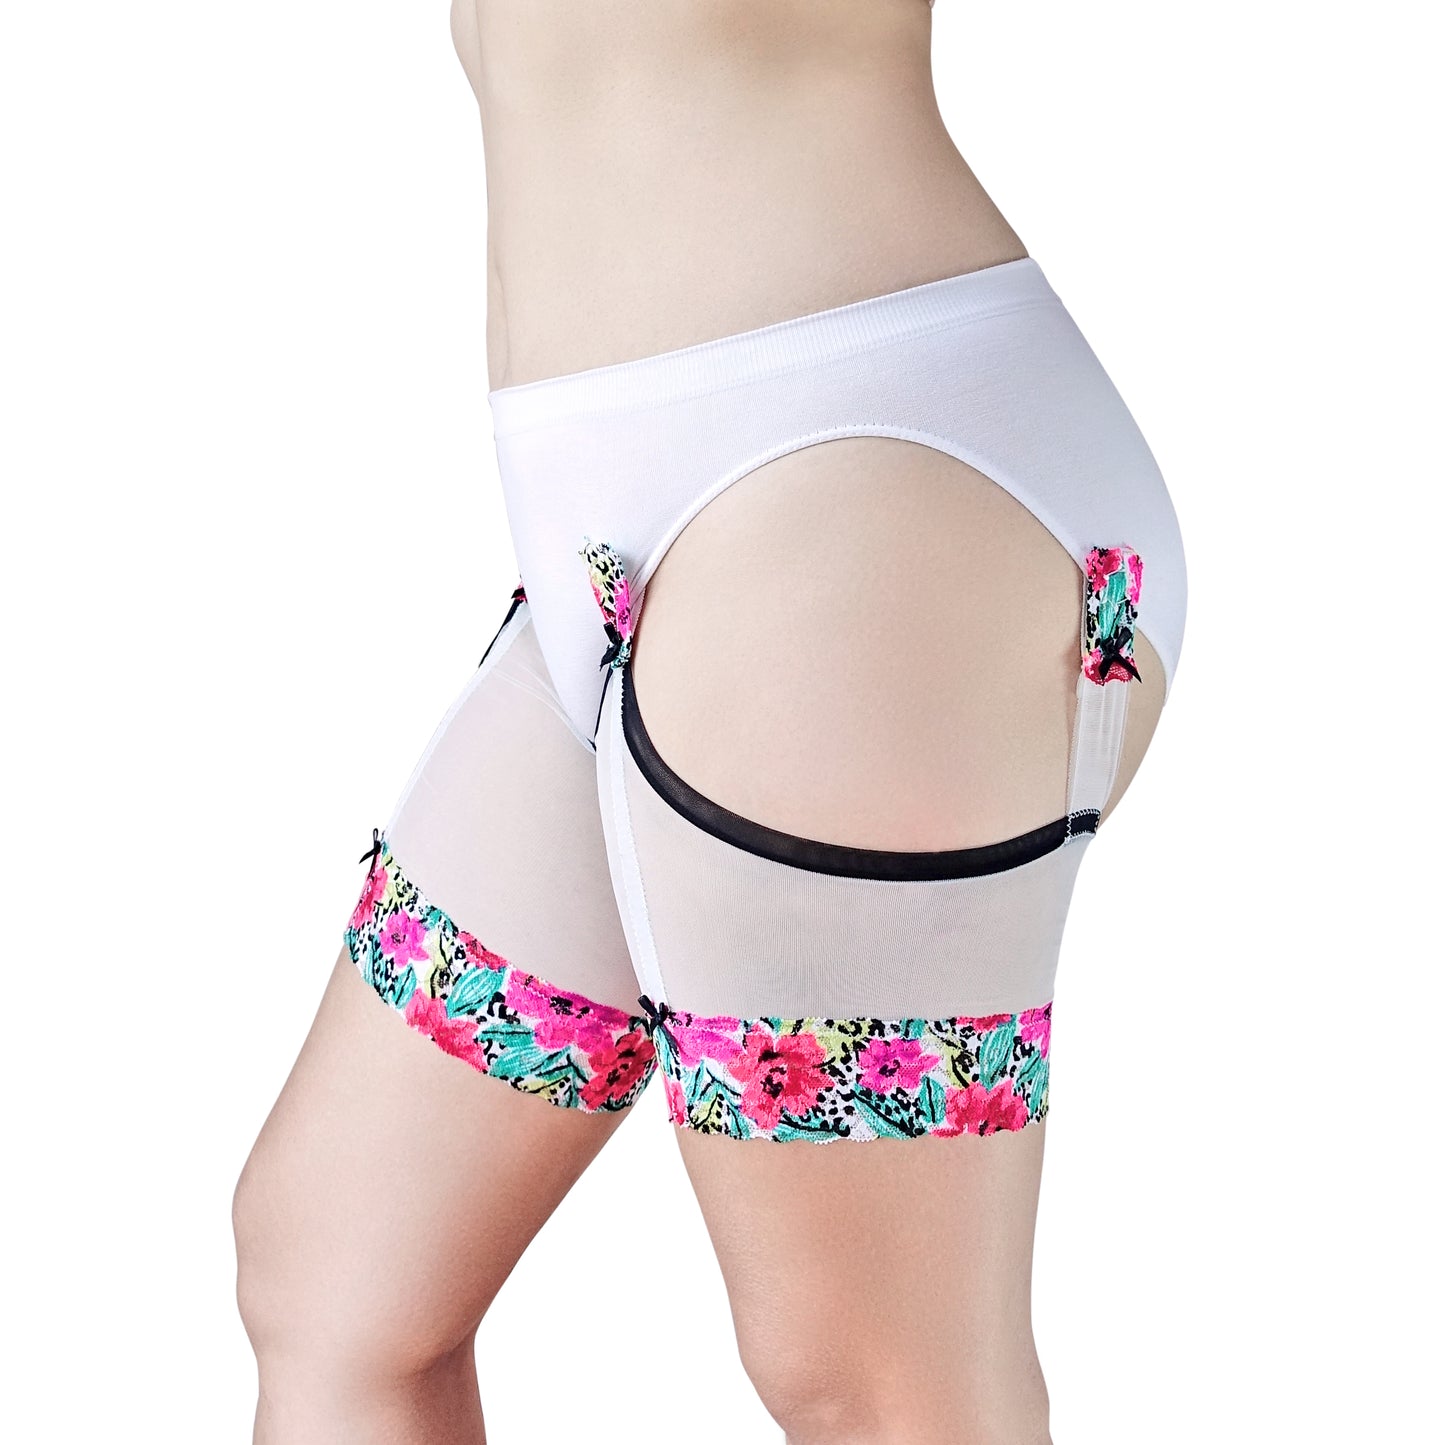 ANTI CHAFE Clip-On Thigh Bands - TROPIC FLORAL